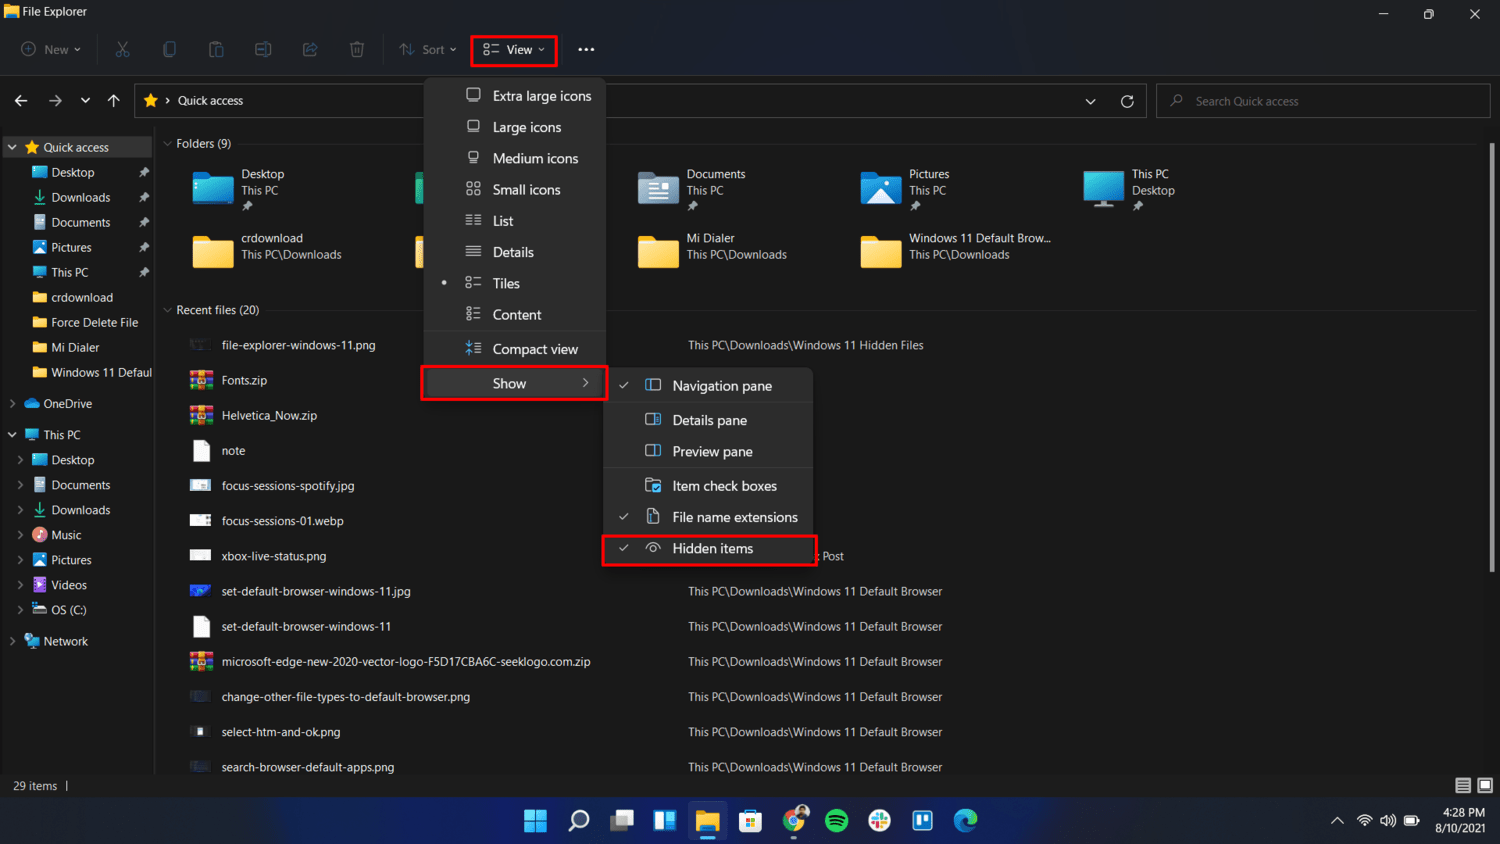 Enable Hidden files using Layout and View Options